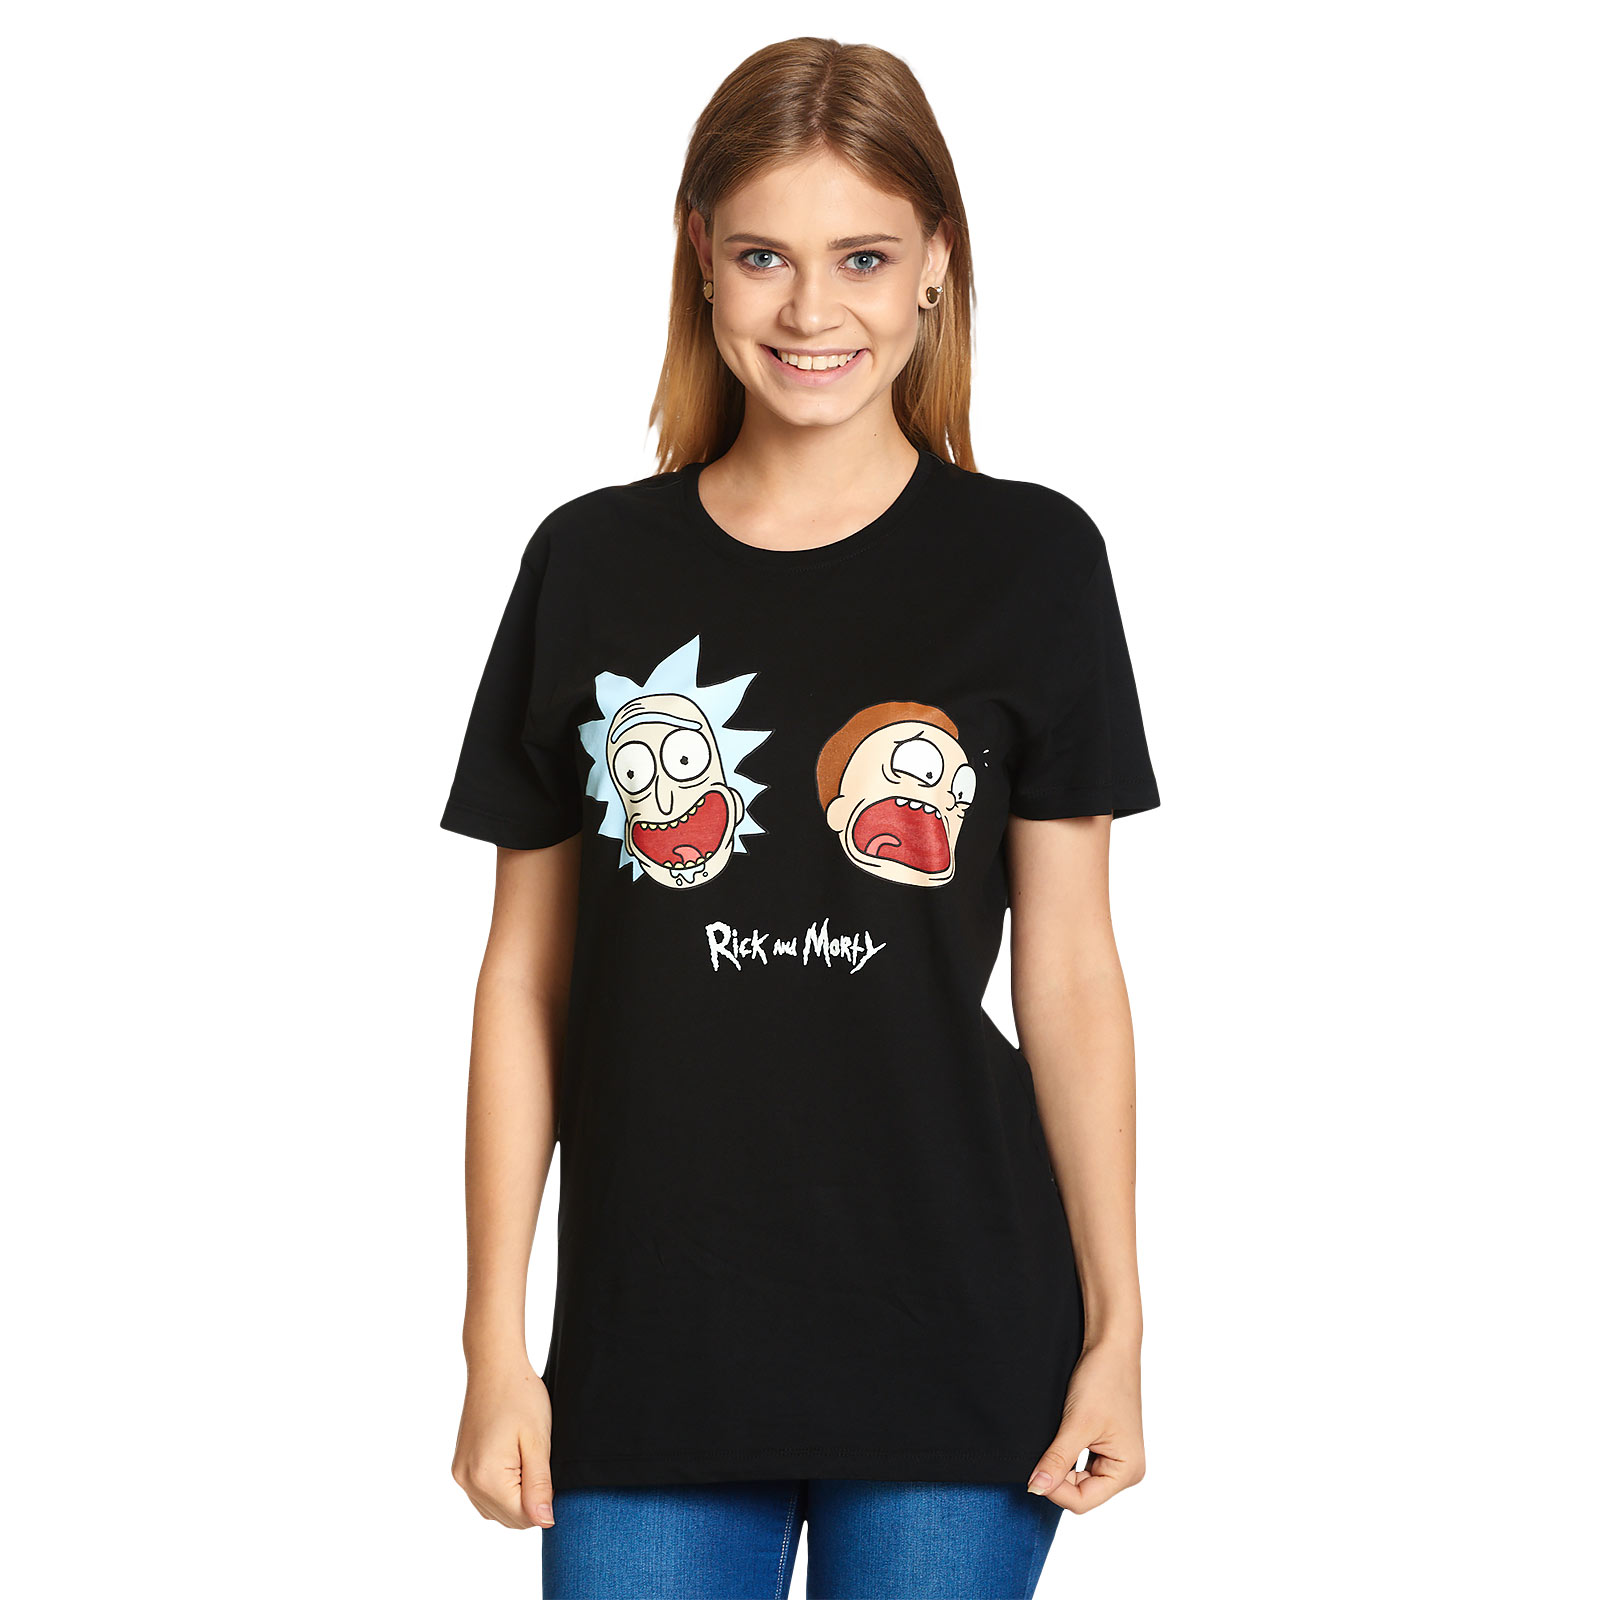 Rick and Morty - Crazy Faces Glow in the Dark T-Shirt